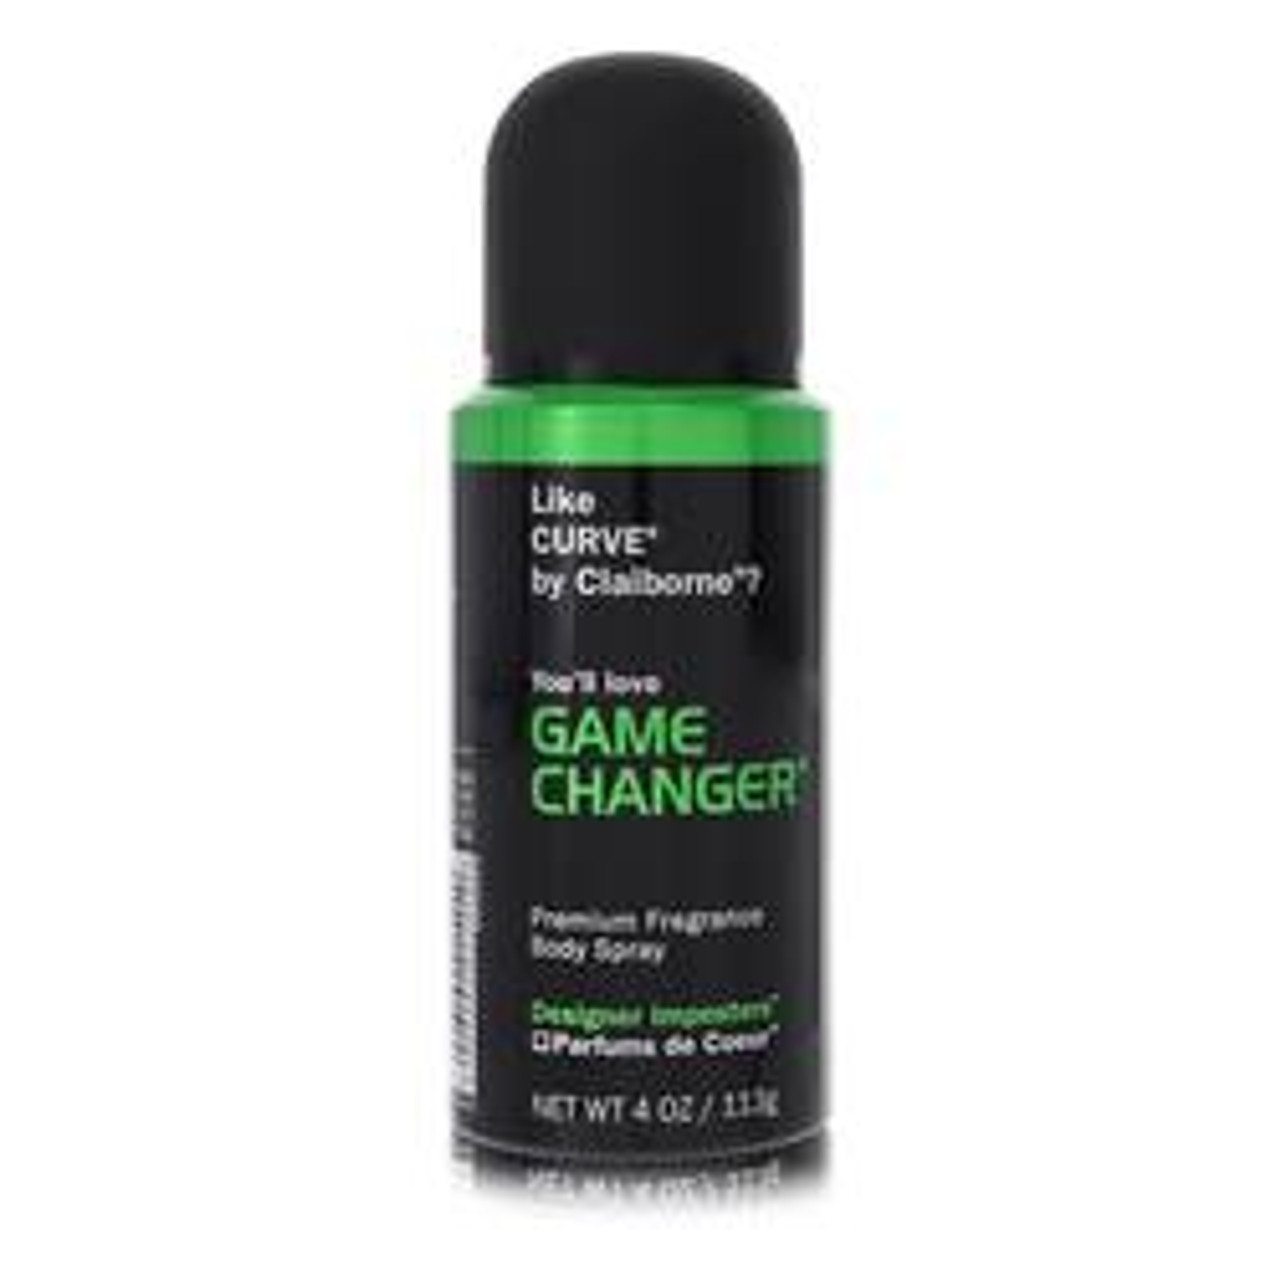 Designer Imposters Game Changer Cologne By Parfums De Coeur Body Spray 4 oz for Men - [From 23.00 - Choose pk Qty ] - *Ships from Miami